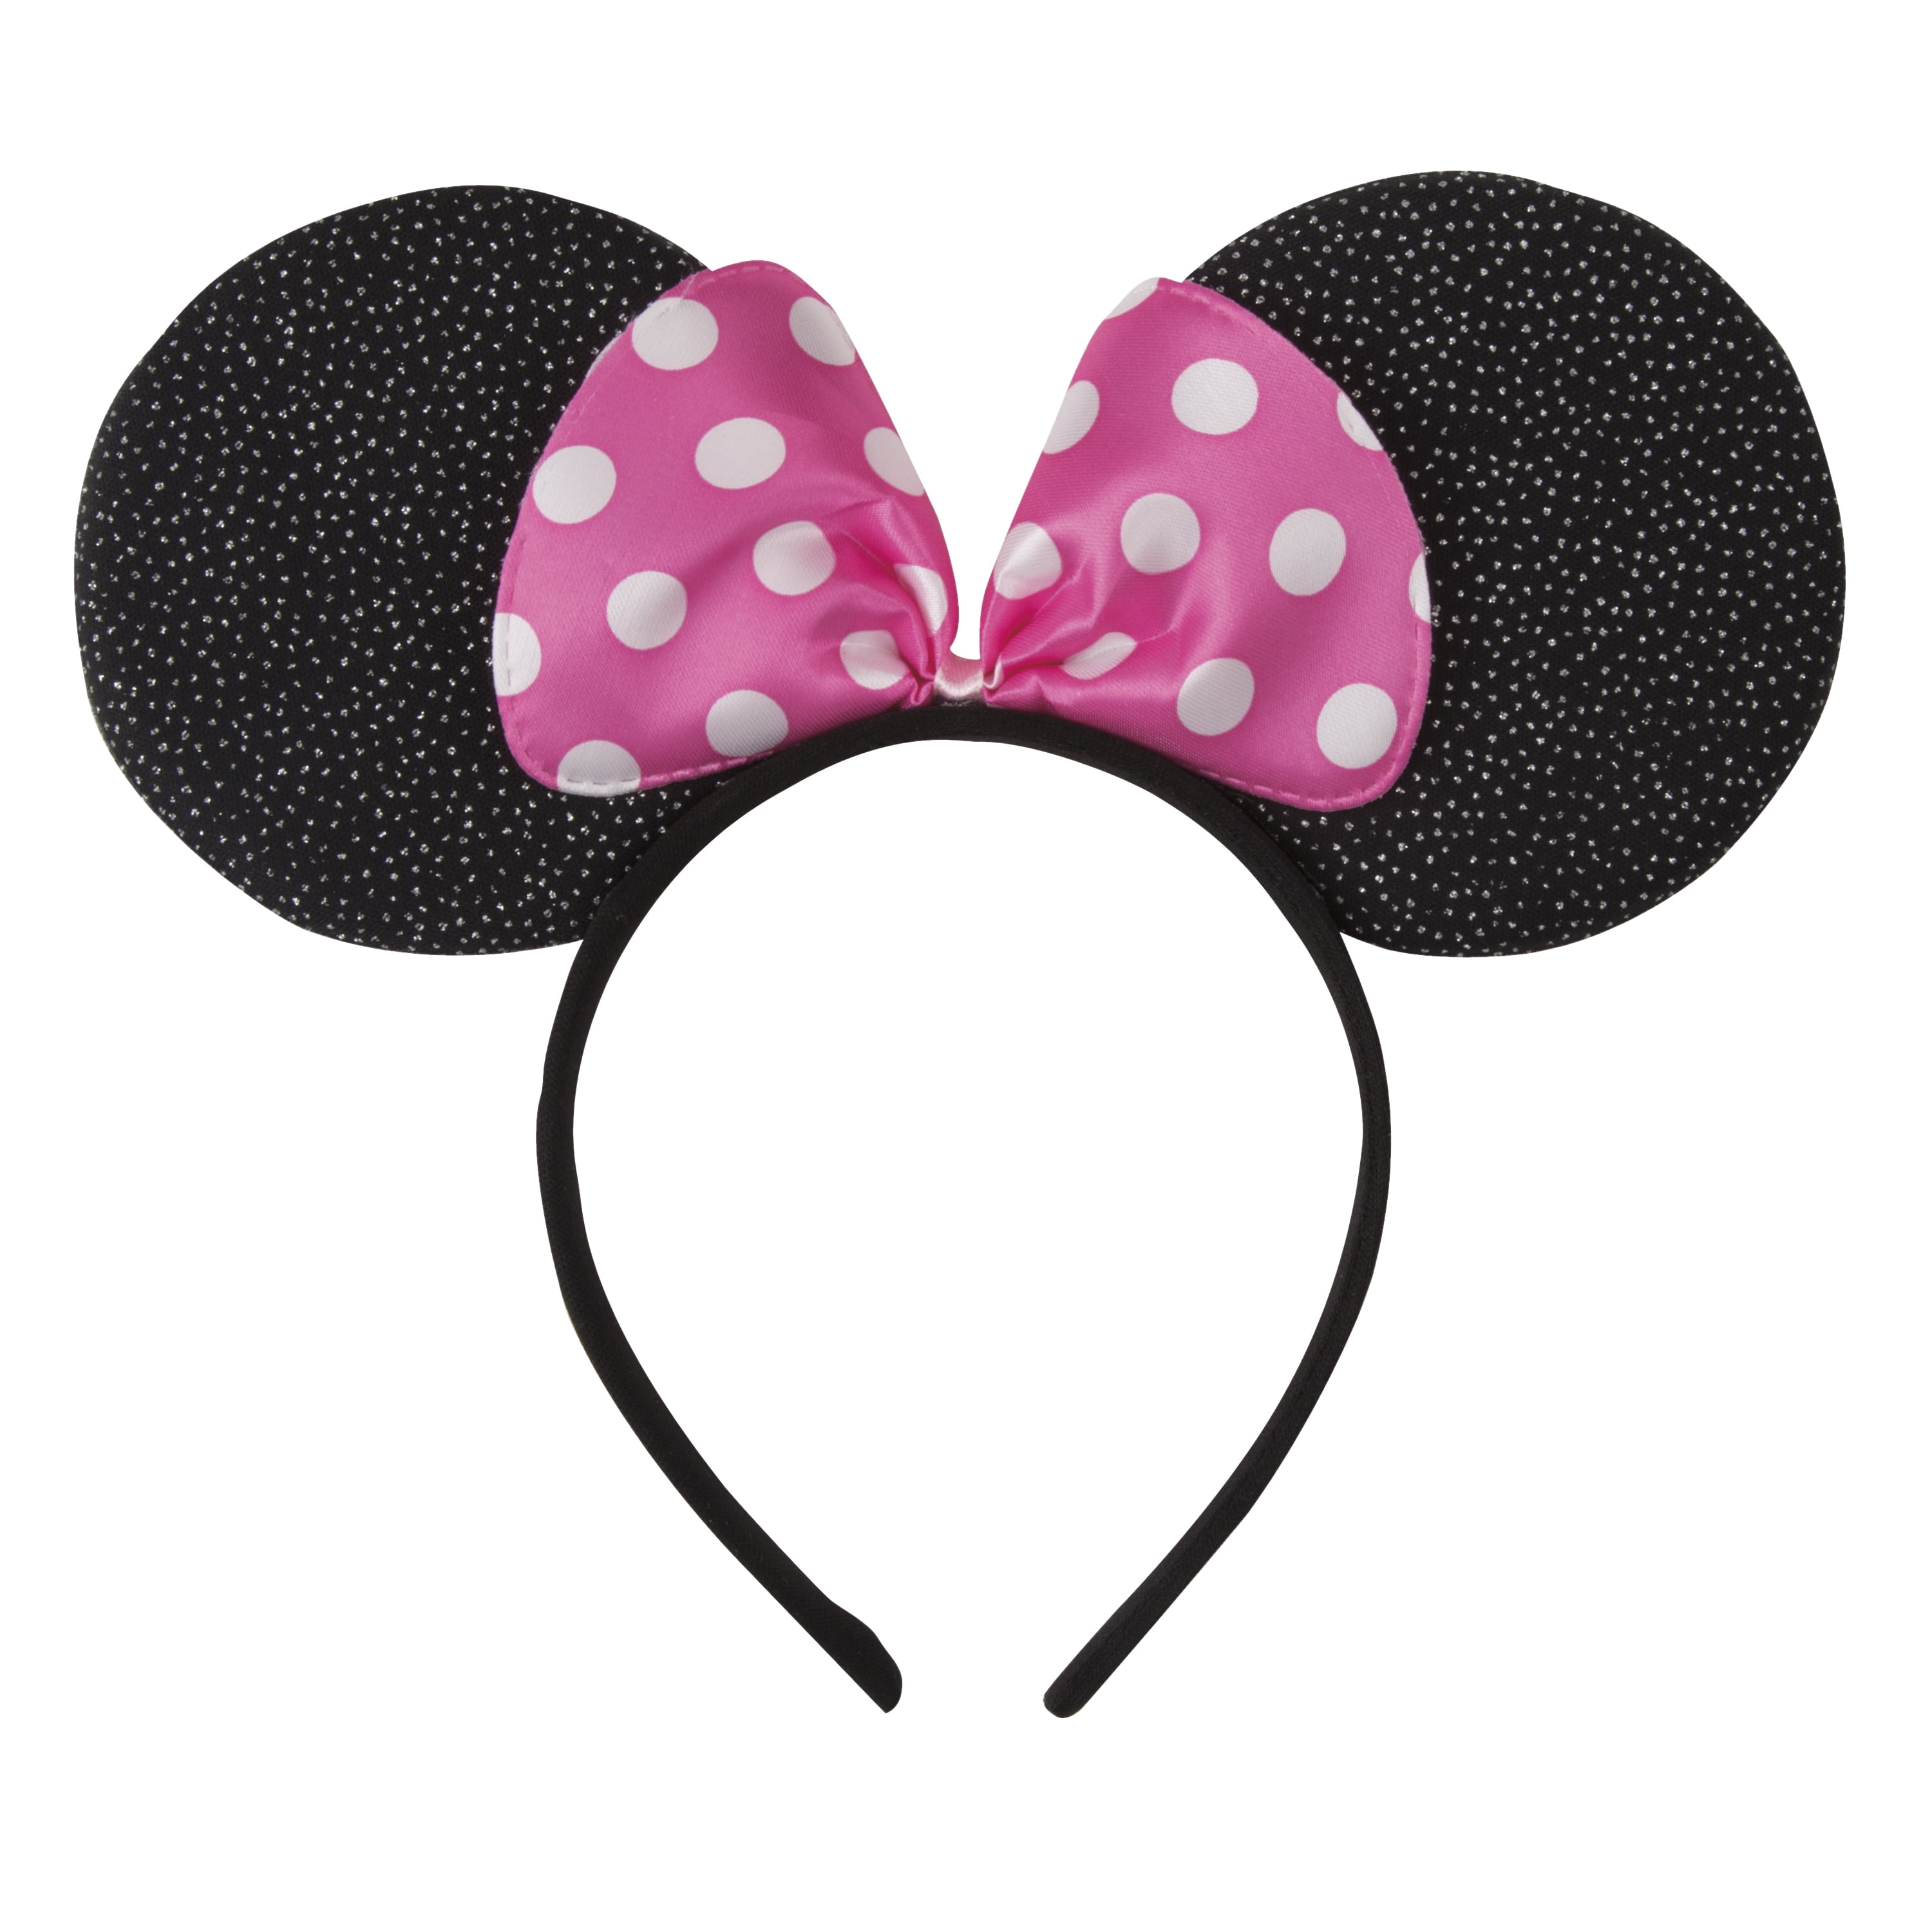 mickey Happy Birthday Minnie Ears with Sequin Bow and Party Hat gift party unbirthday disney birthdays